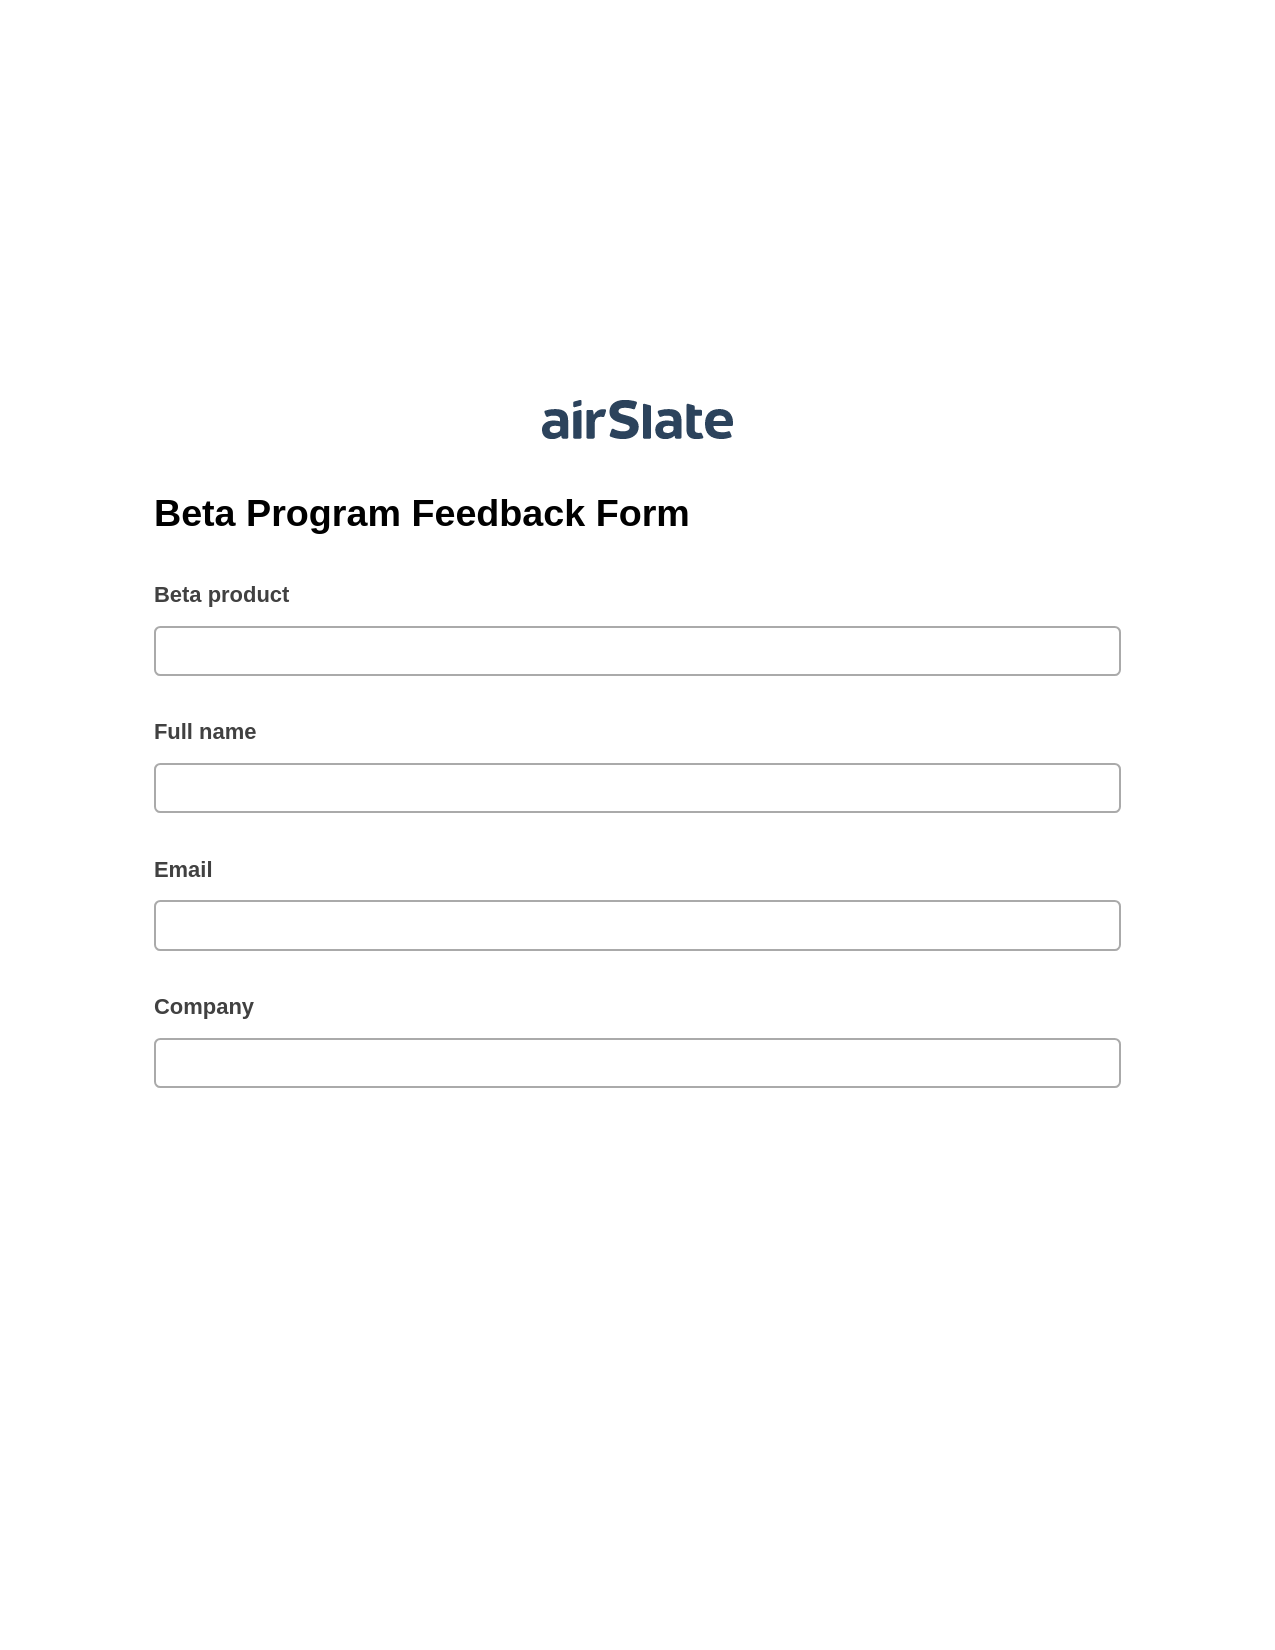 Beta Program Feedback Form Pre-fill from NetSuite Records Bot, Send a Slate with Roles Bot, Export to Excel 365 Bot